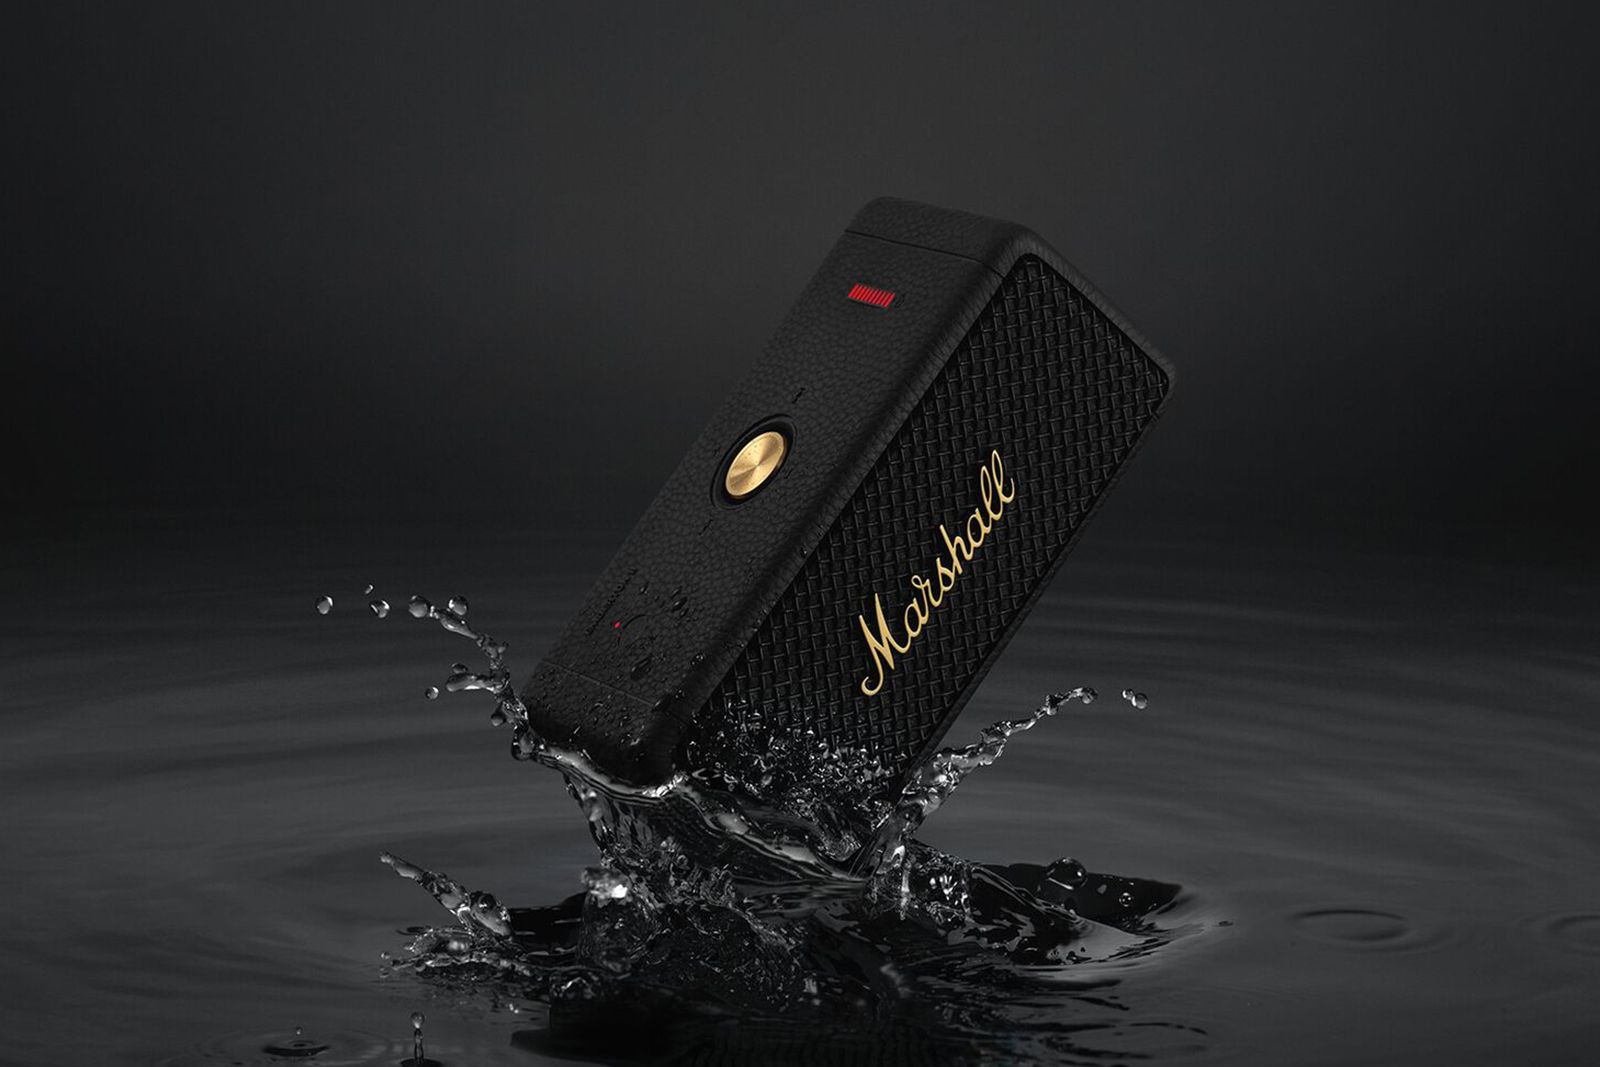 Marshall introduces the Emberton II speaker with a 30-hour battery photo 1